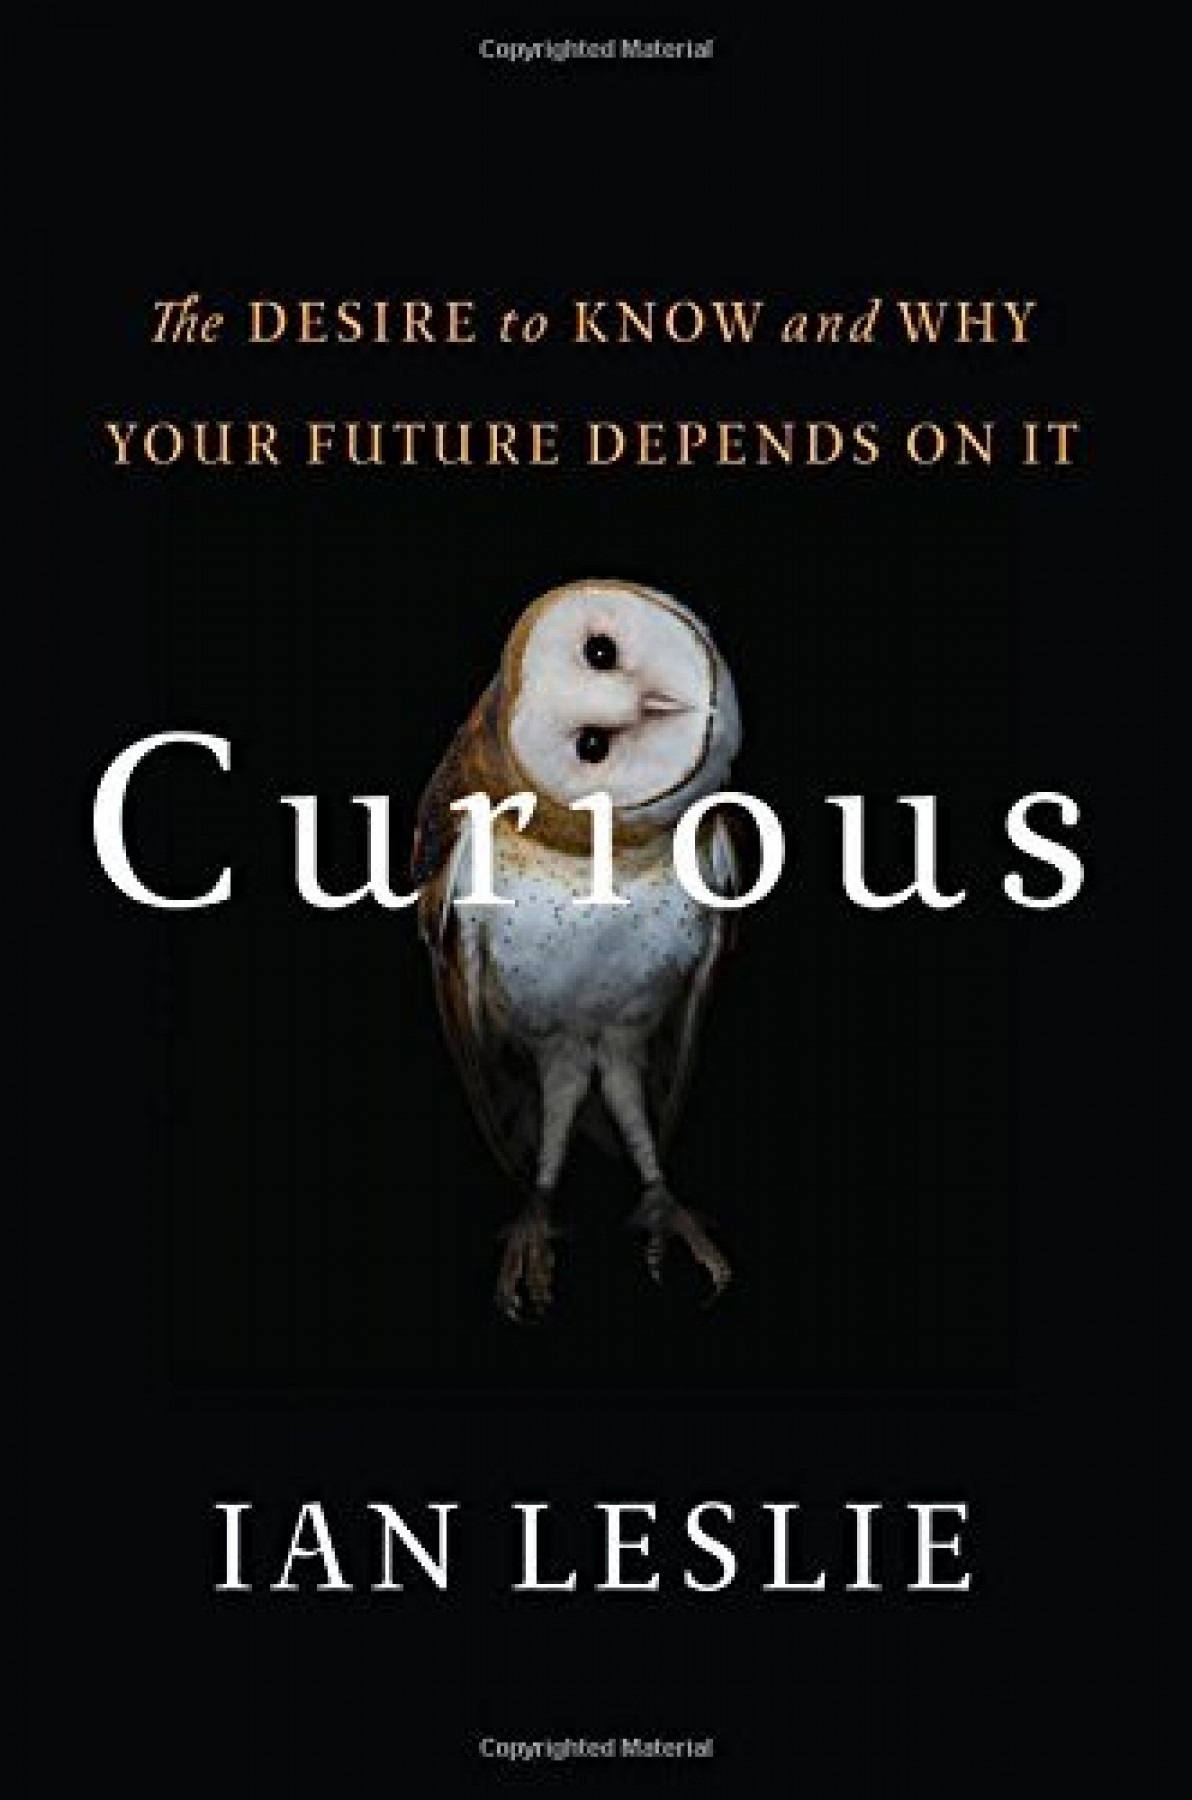 Curious: The desire to know and why your future depends on it